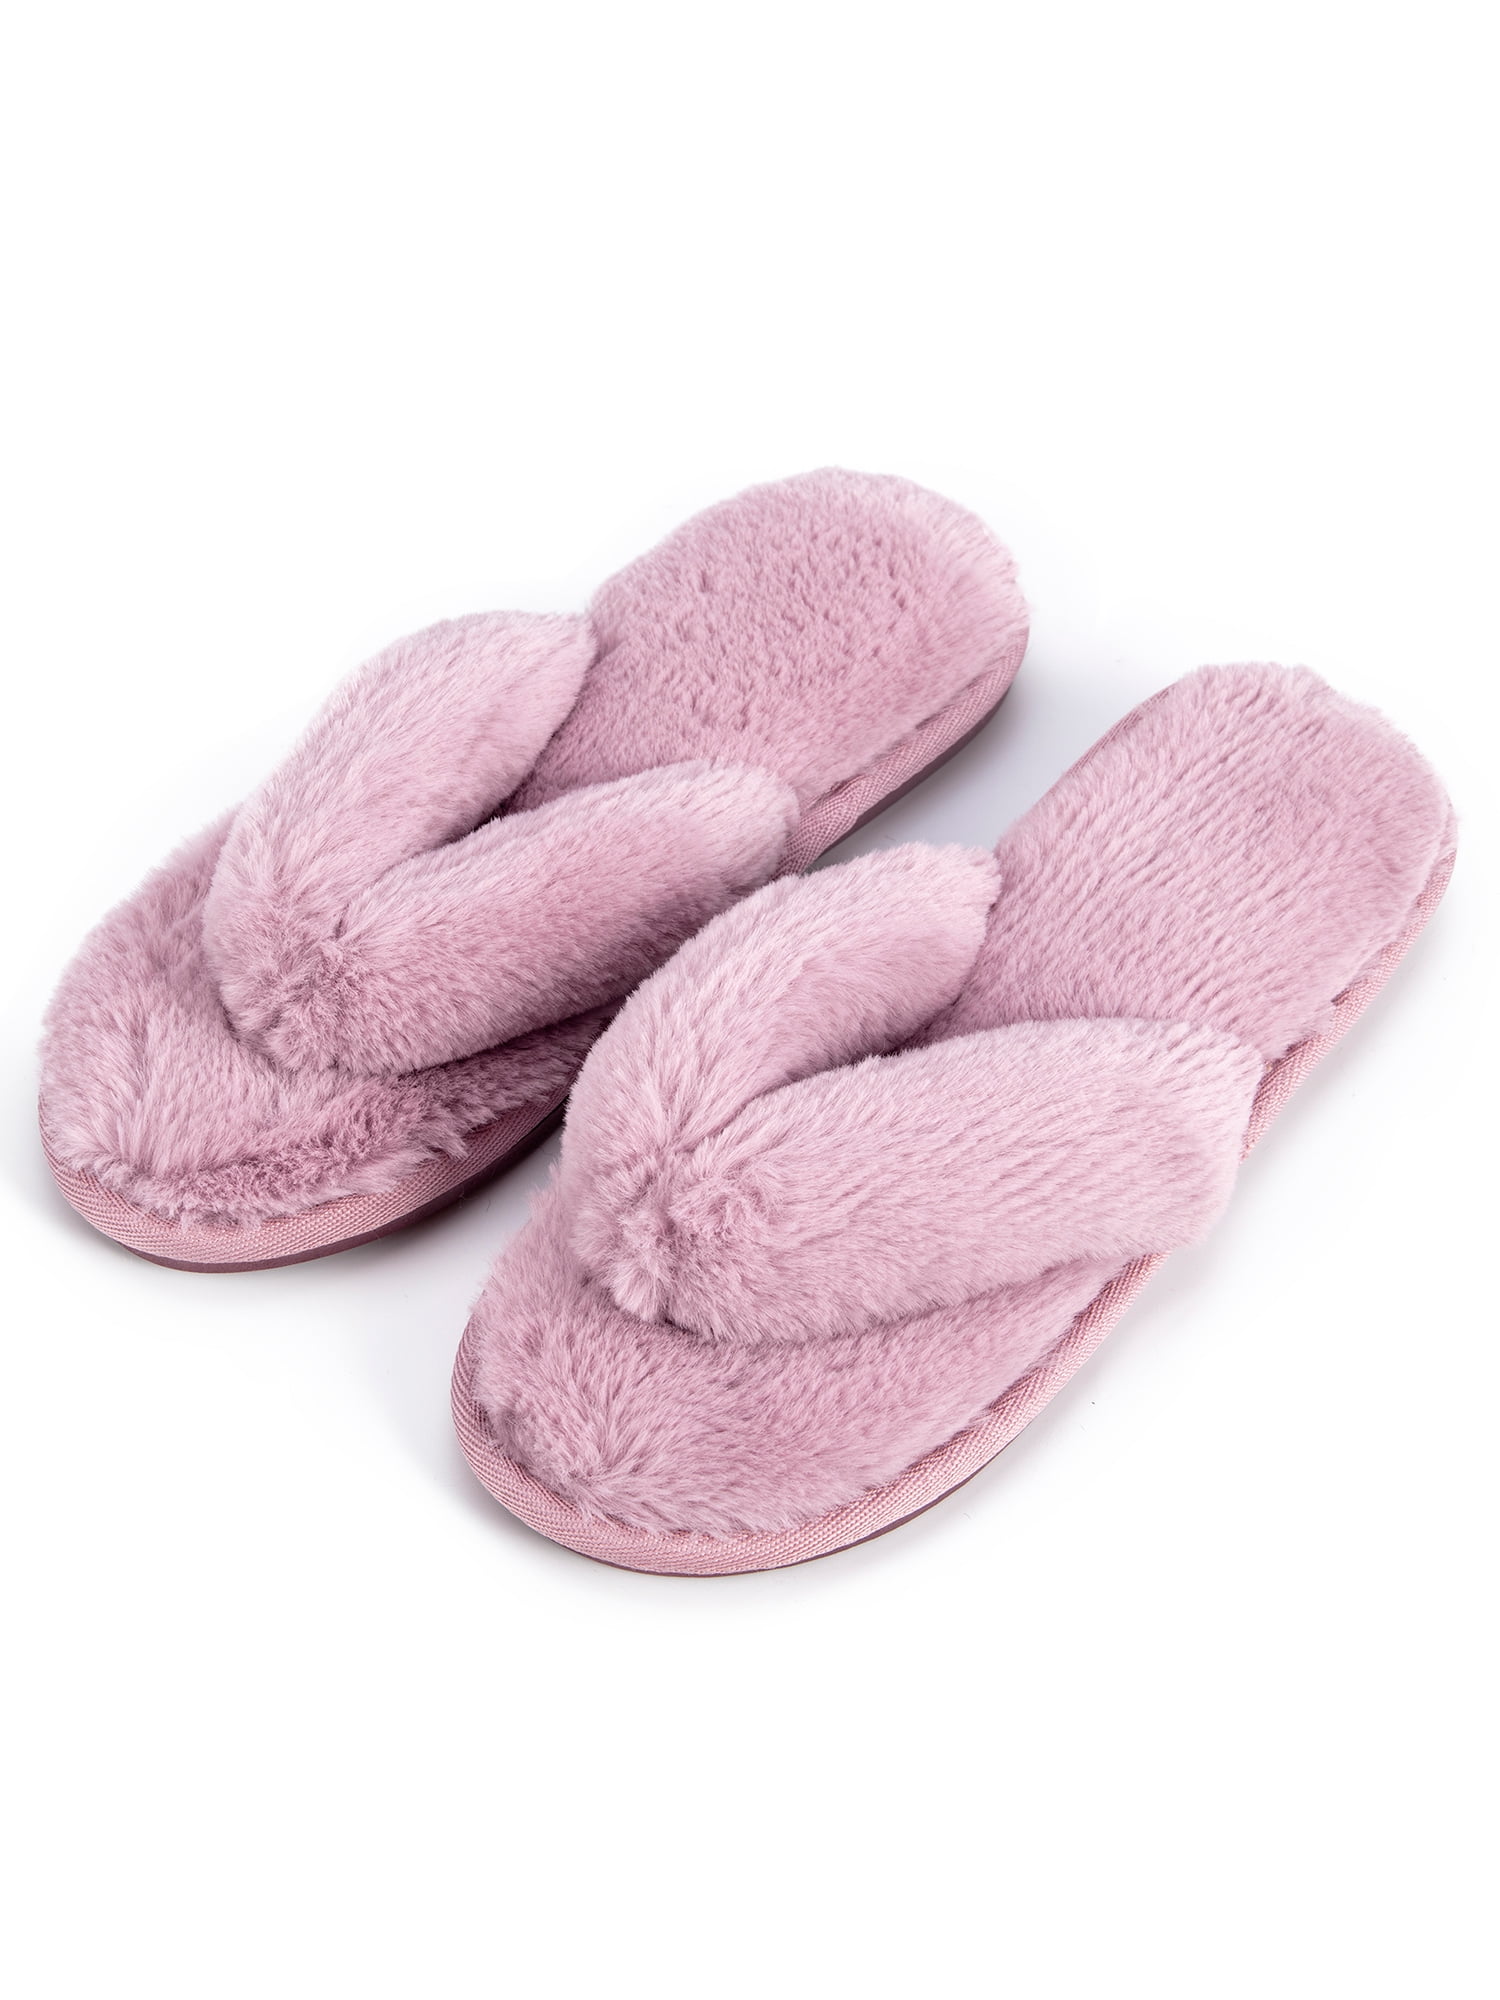 Crazy Lady Women's Fuzzy Fluffy Furry Fur Slippers Flip Flop Open Toe Cozy House Sandals Slides Soft Flat Comfy Anti-Slip Spa Indoor Outdoor Slip on